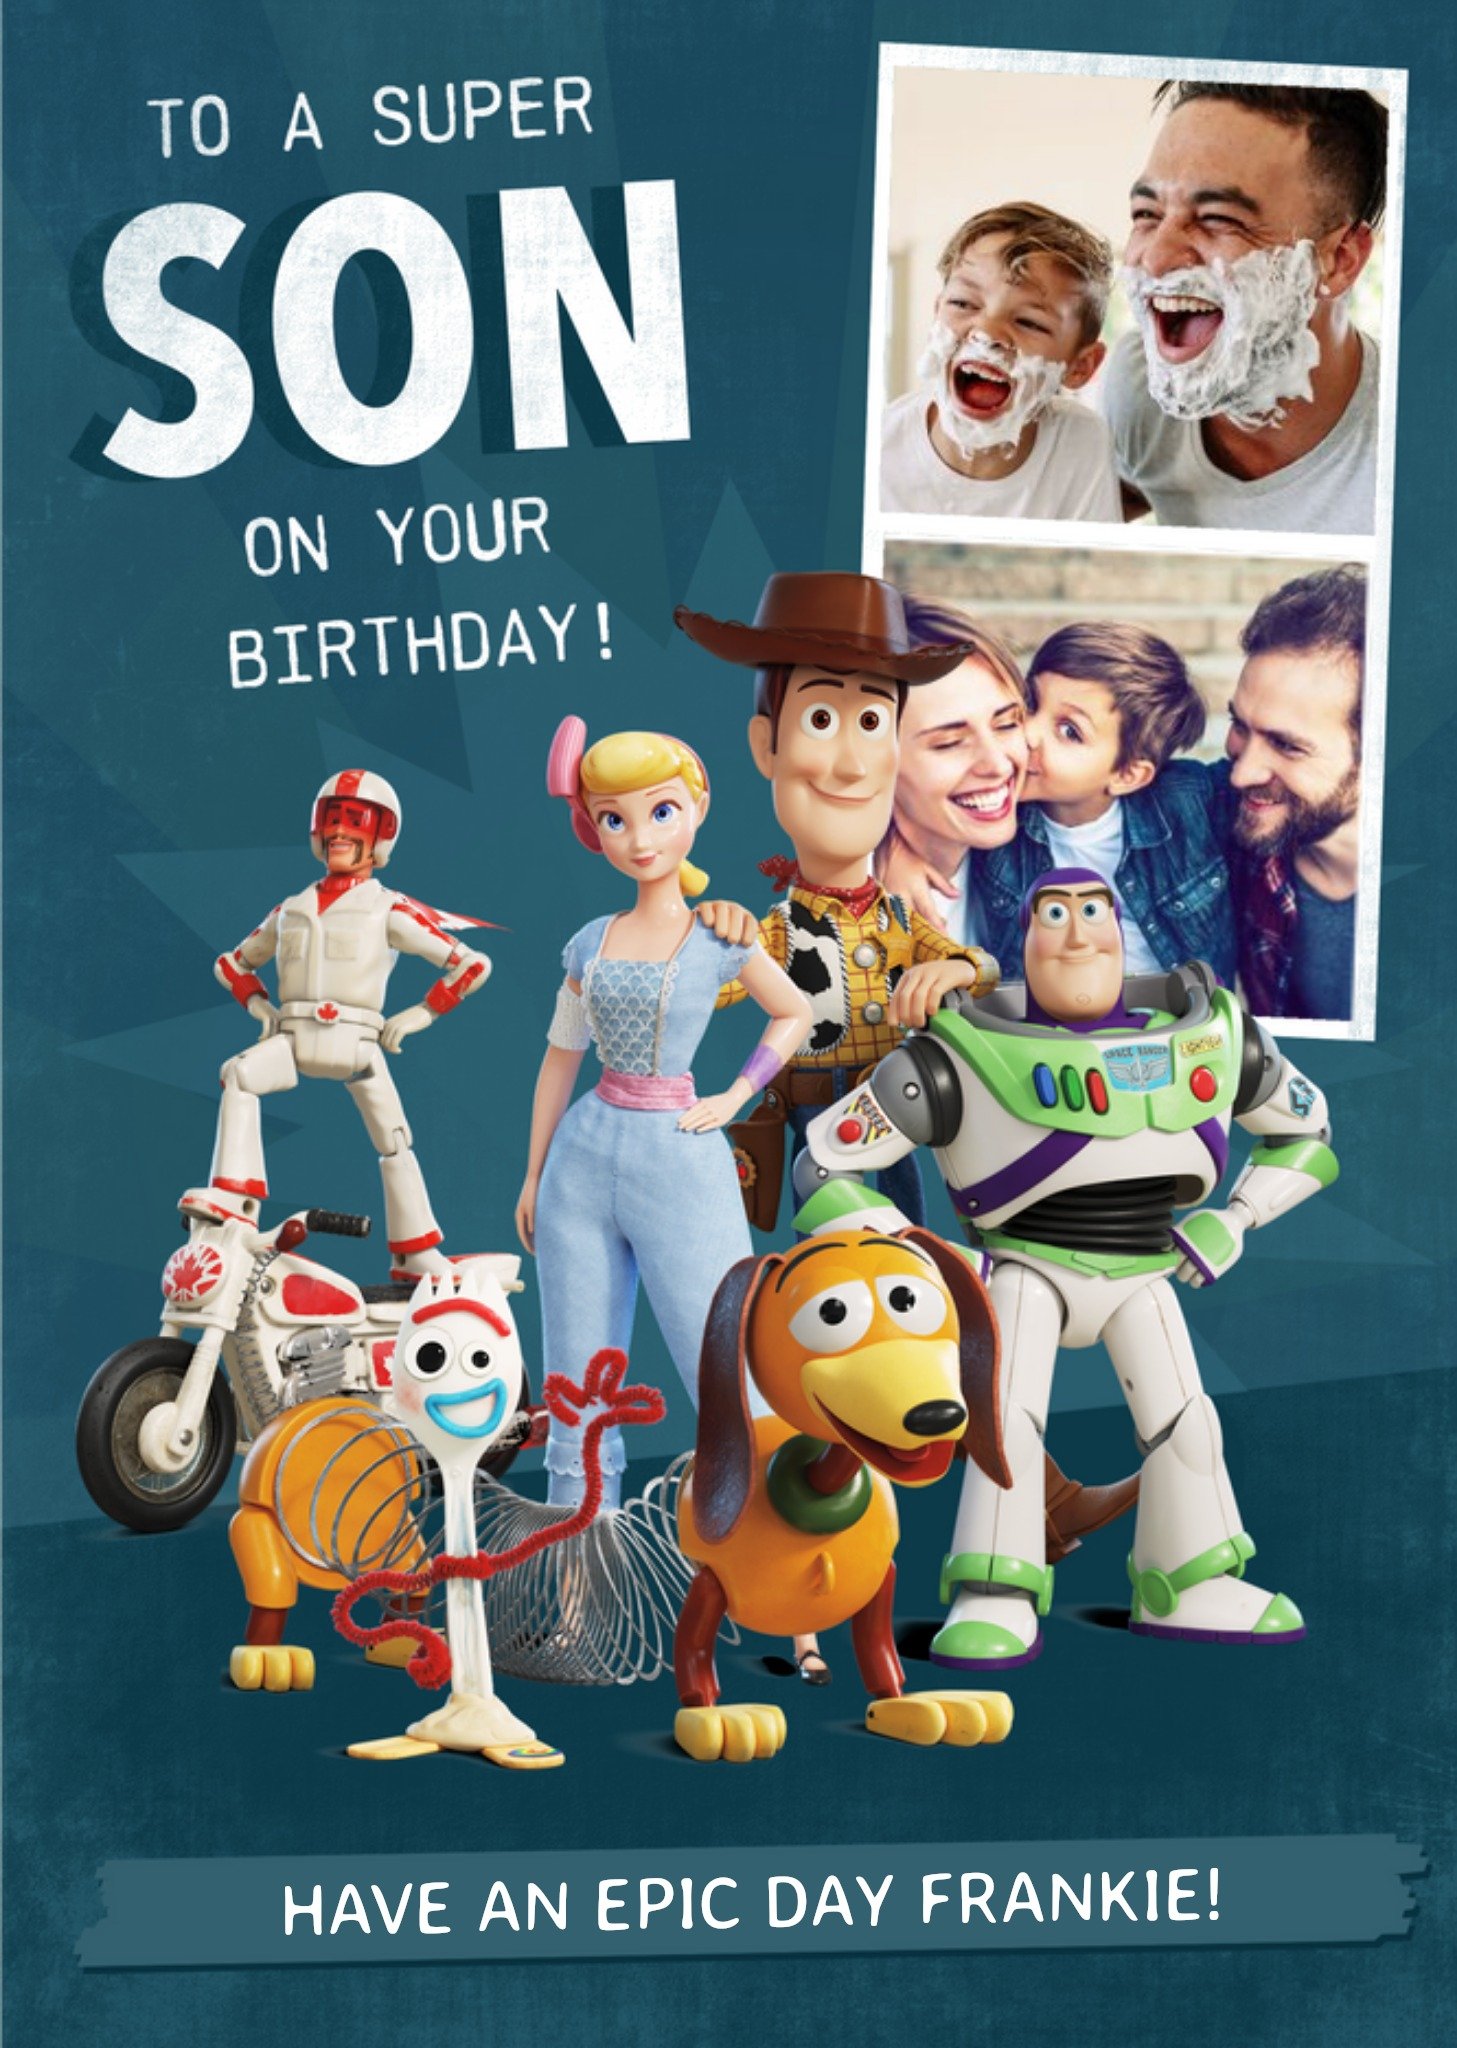 Disney Toy Story 4 - To A Super Son Photo Card Ecard